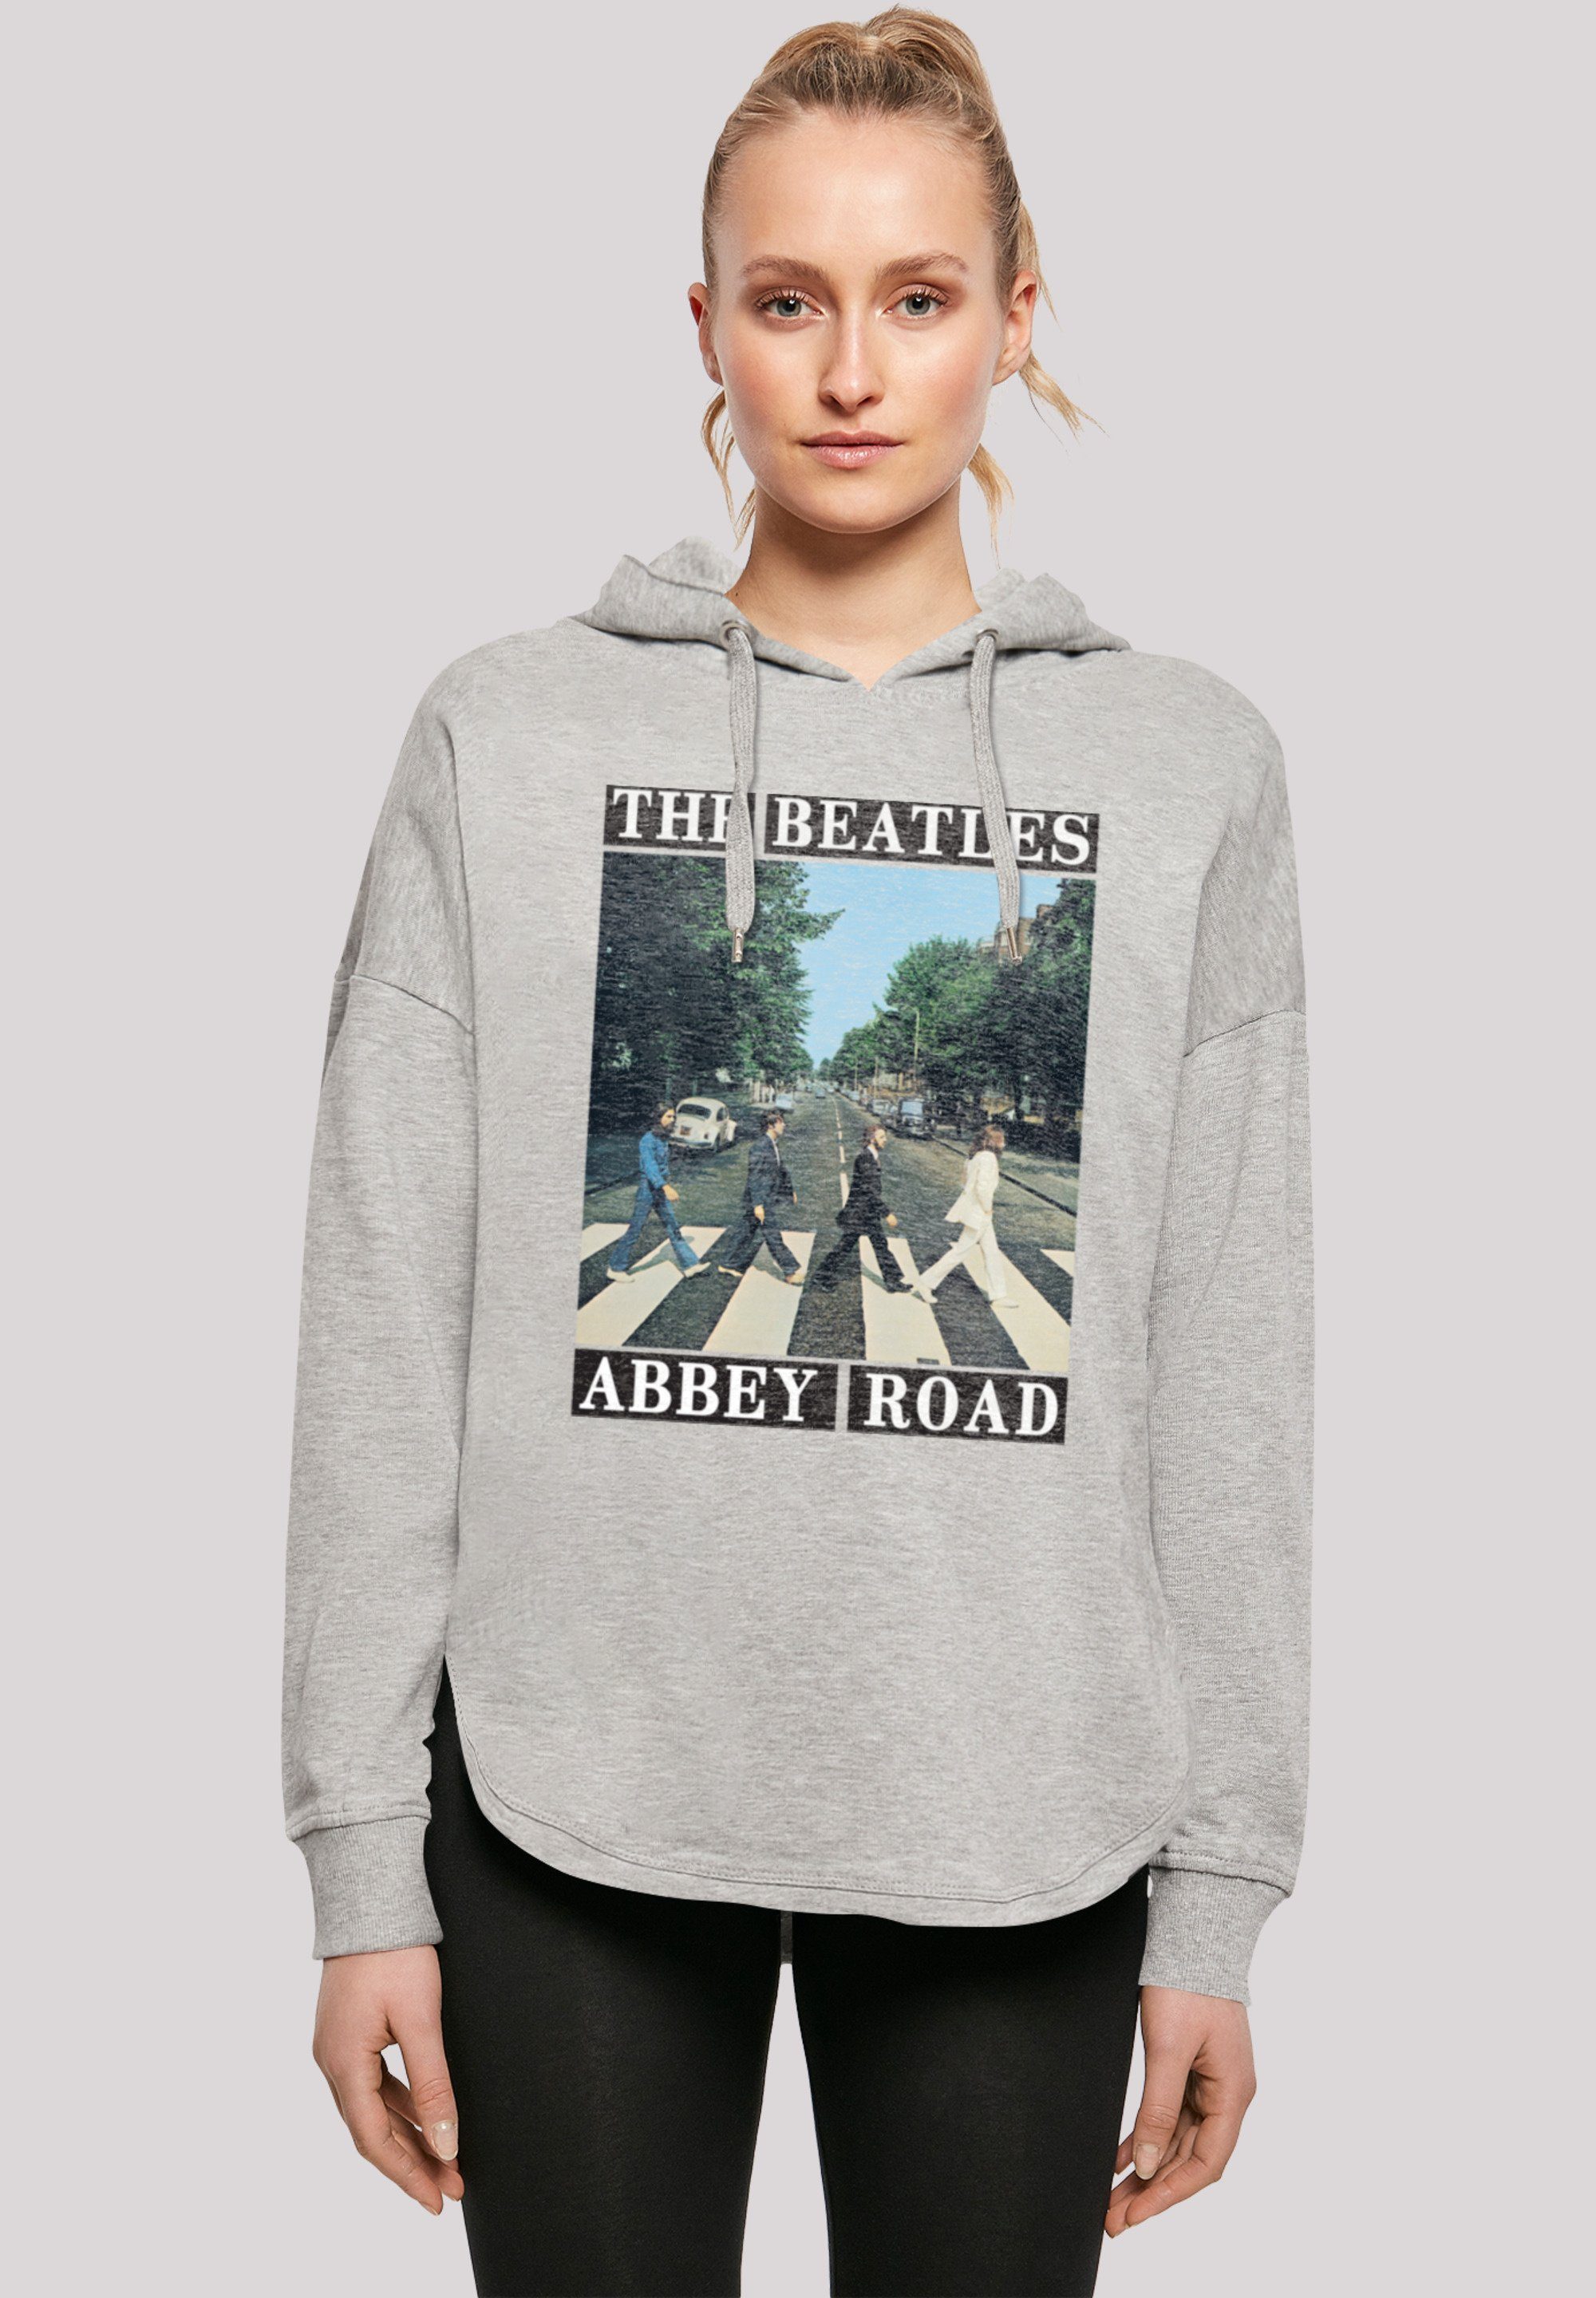 Oversize Print, Kapuzenpullover F4NT4STIC Abbey Road Hoodie Beatles lizenzierter Band Beatles Offiziell The The